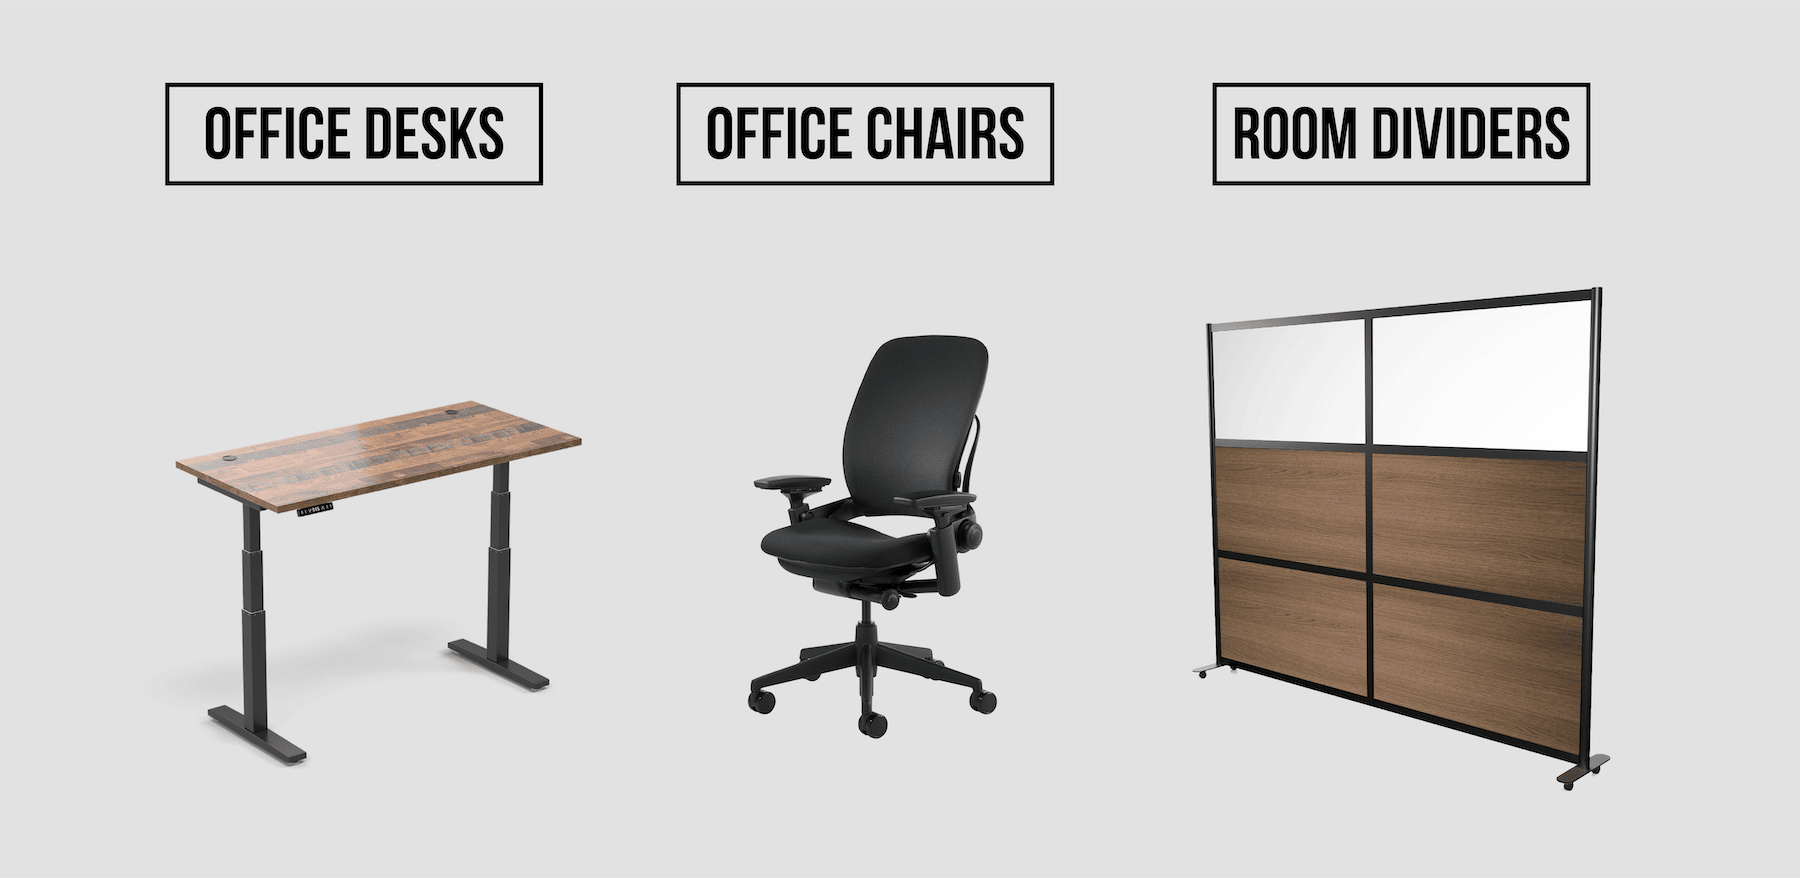 Types of Contract Furniture: Office Desks, Office Chairs, and Room Dividers